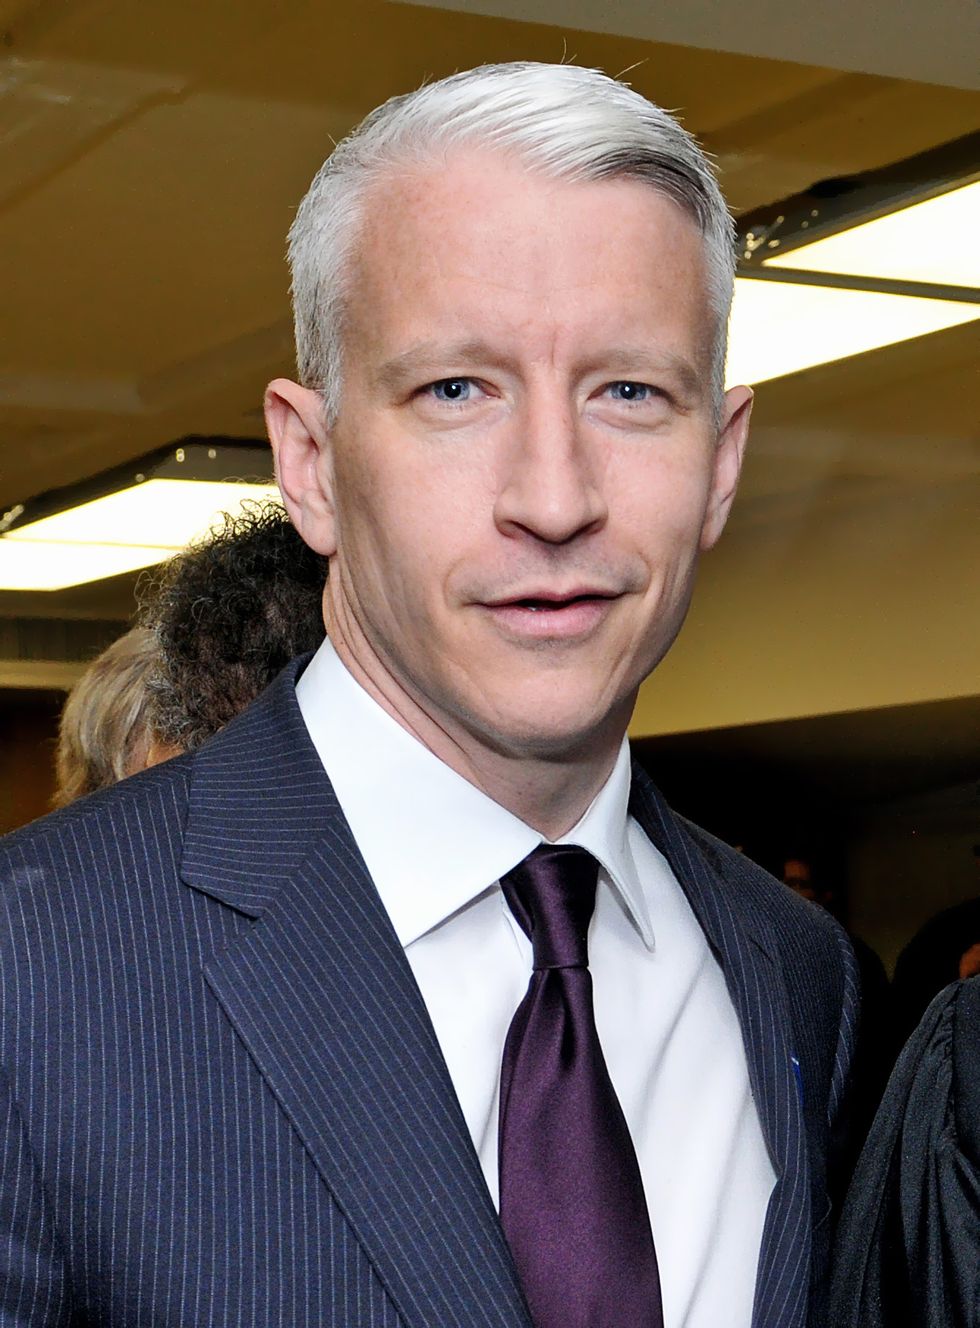 5 Times Anderson Cooper Said Exactly What We're All Thinking About President Trump